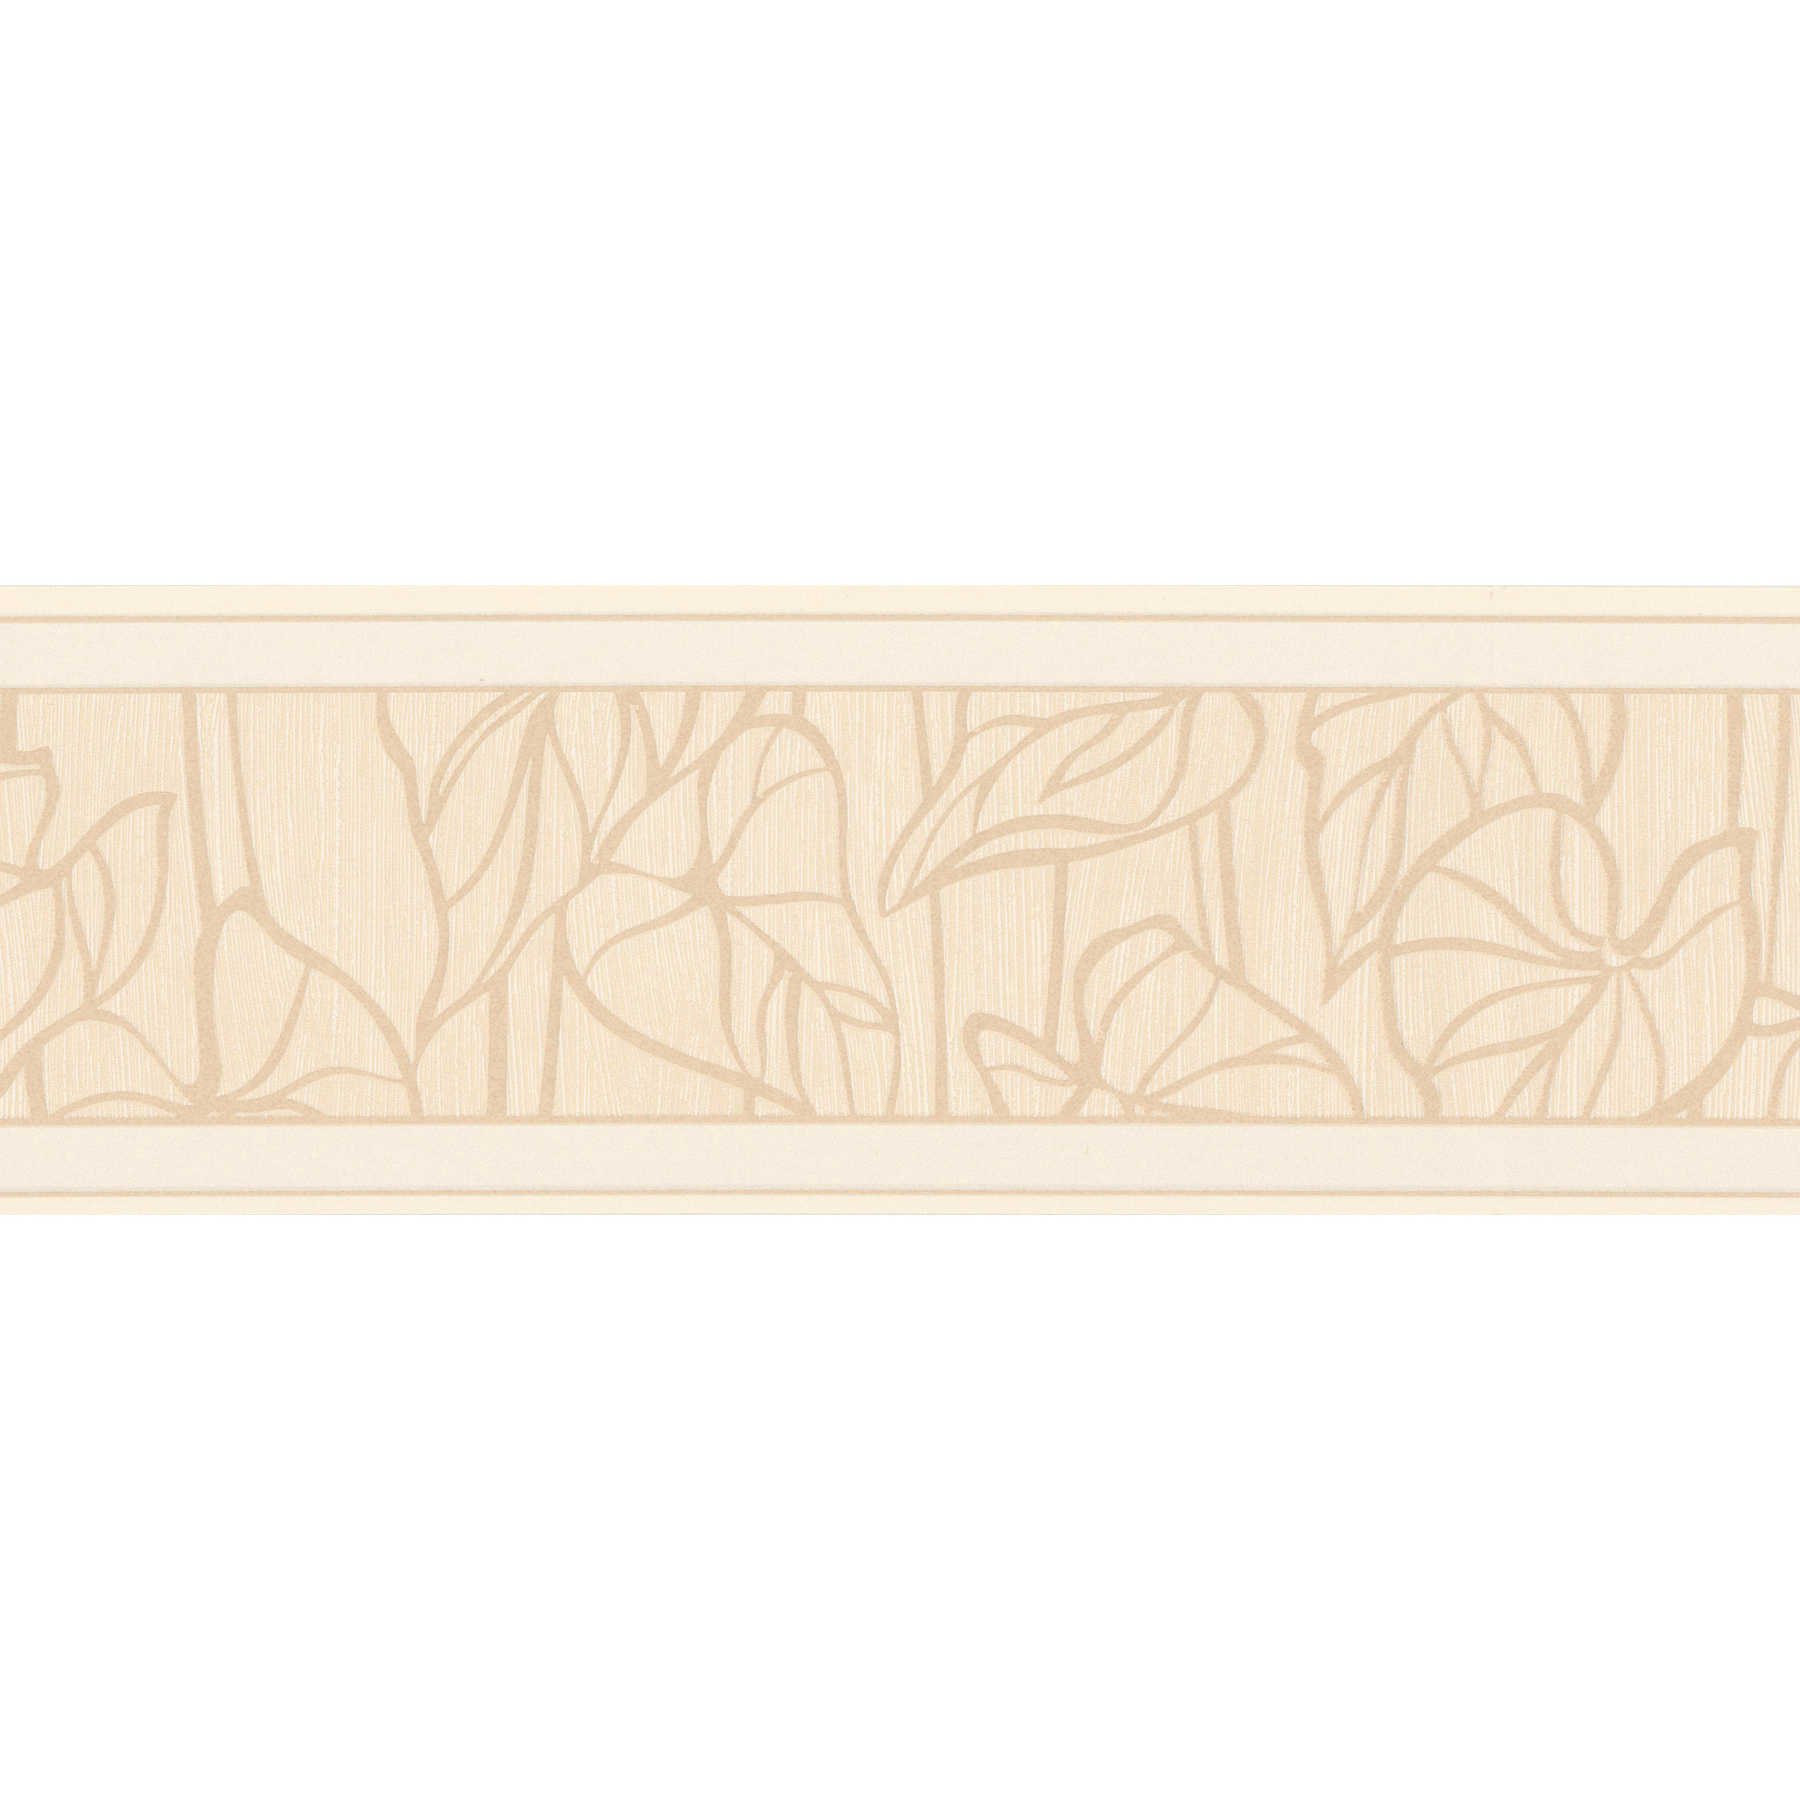         Border with leaf motif and textured pattern - White
    